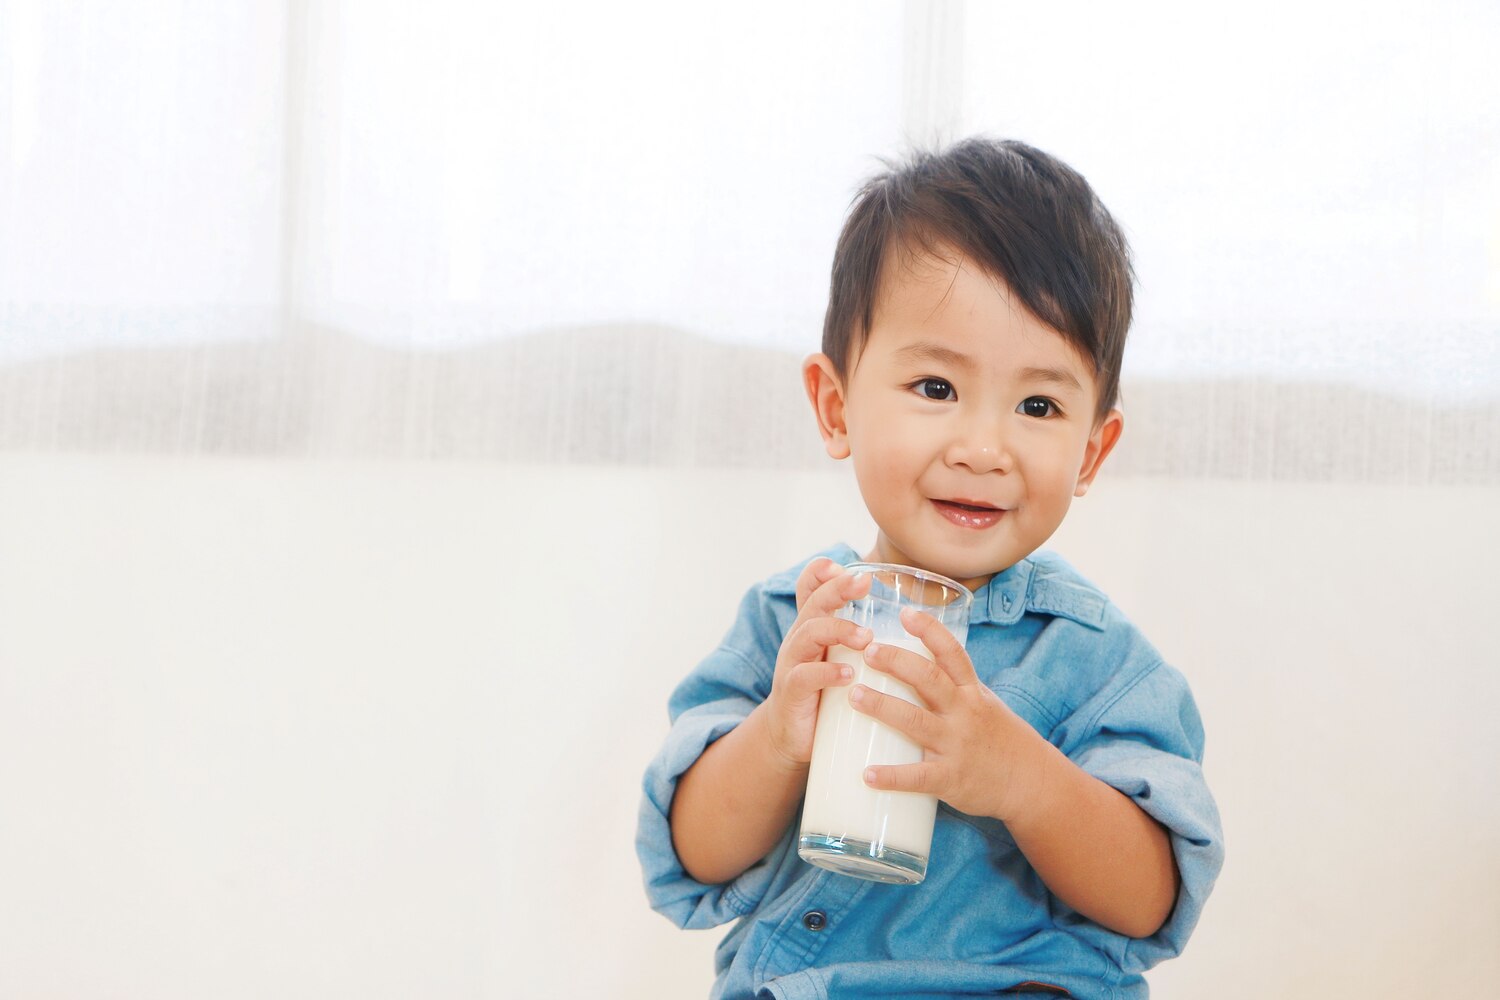 A toddler with a glass of milk